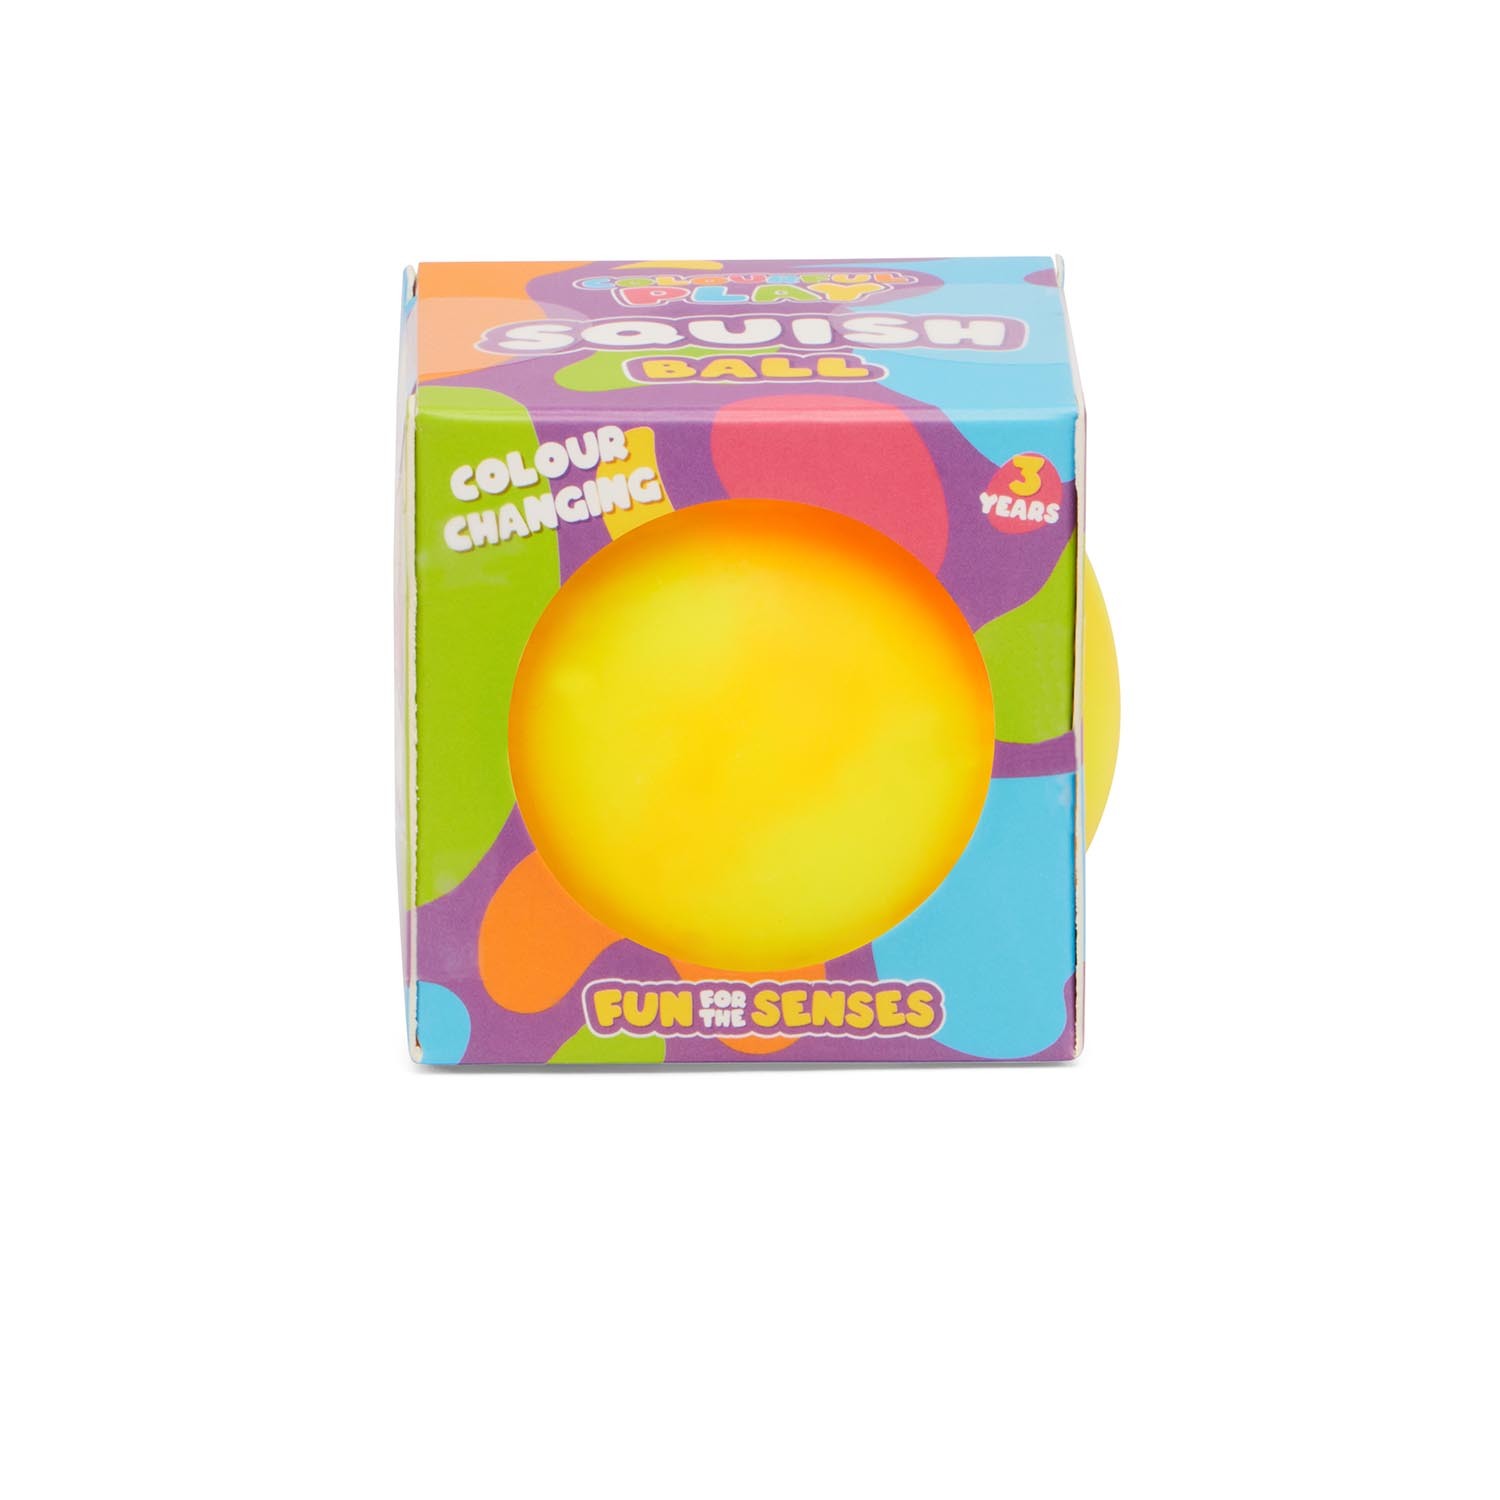 Single ToyMania Colour Changing Sensory Squish Ball in Assorted styles Image 9